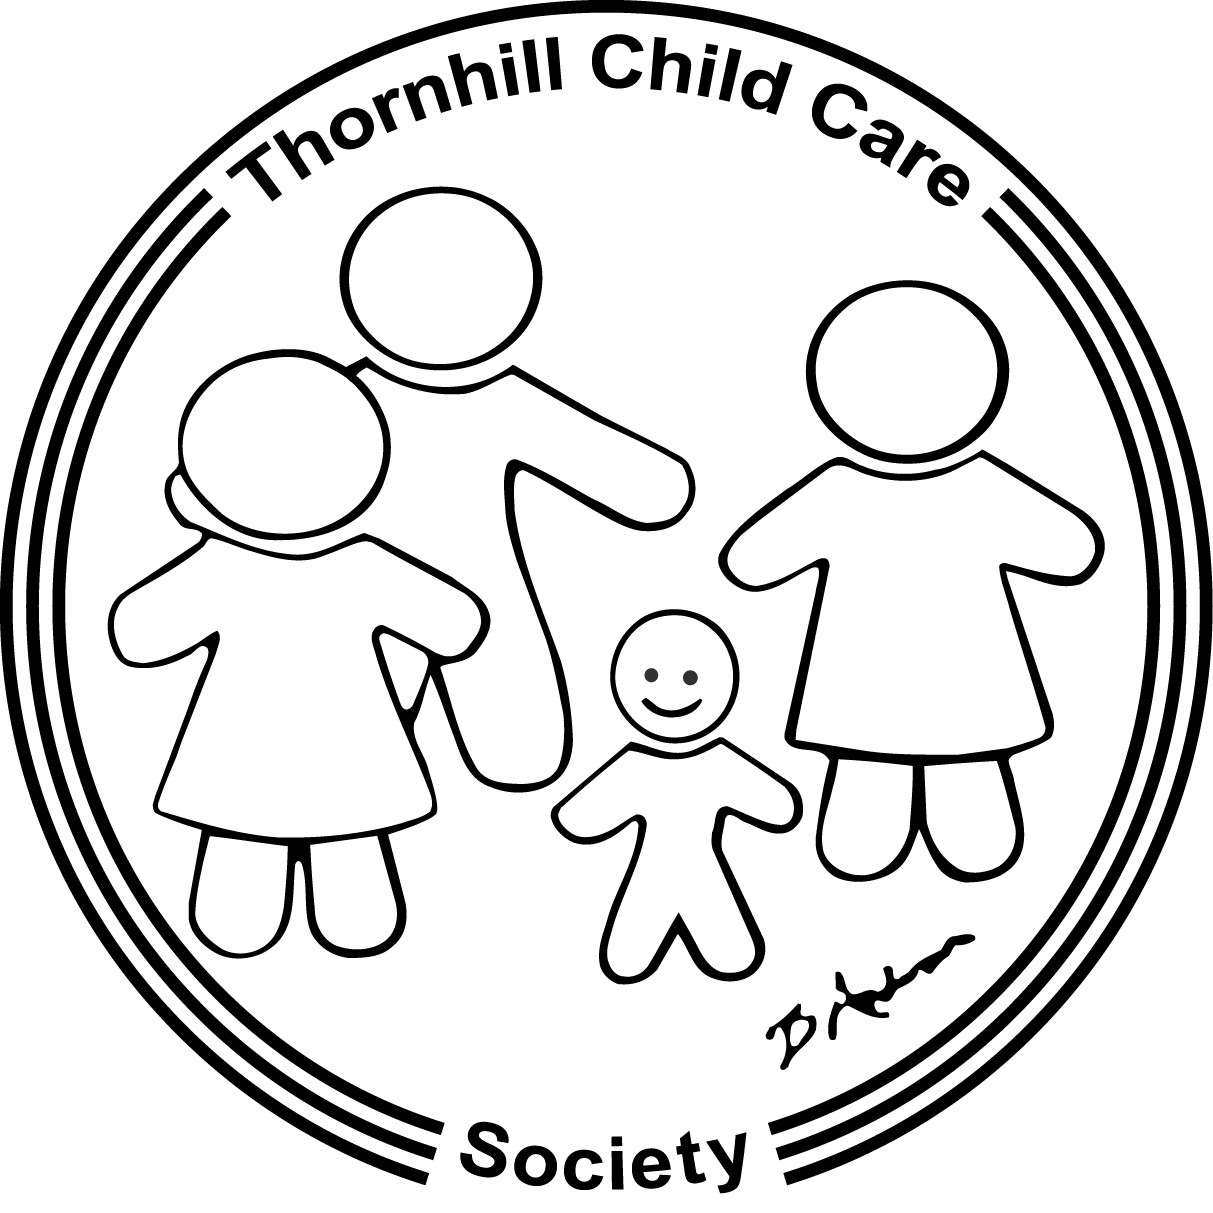 Thornhill Child Care Society